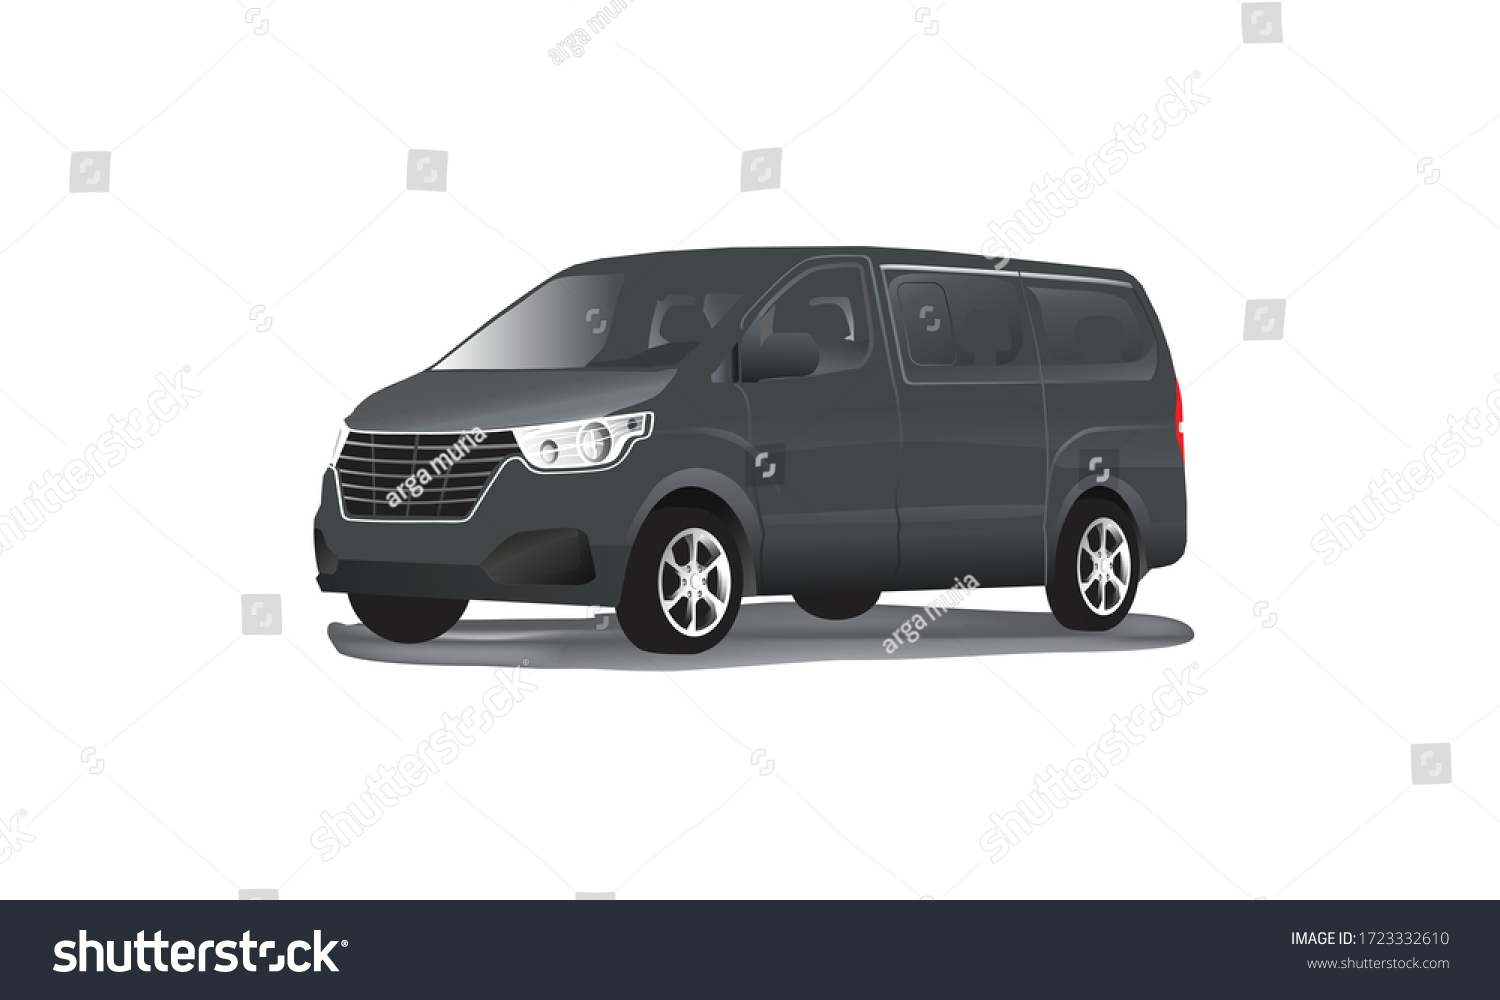 SVG of luxurious modern 3d h1 grand royale mpv multi purpose vehicle, gmc, chevy passenger van for transportaions, delivery and shipping service logo template, for europe, asia, korea, us and others svg